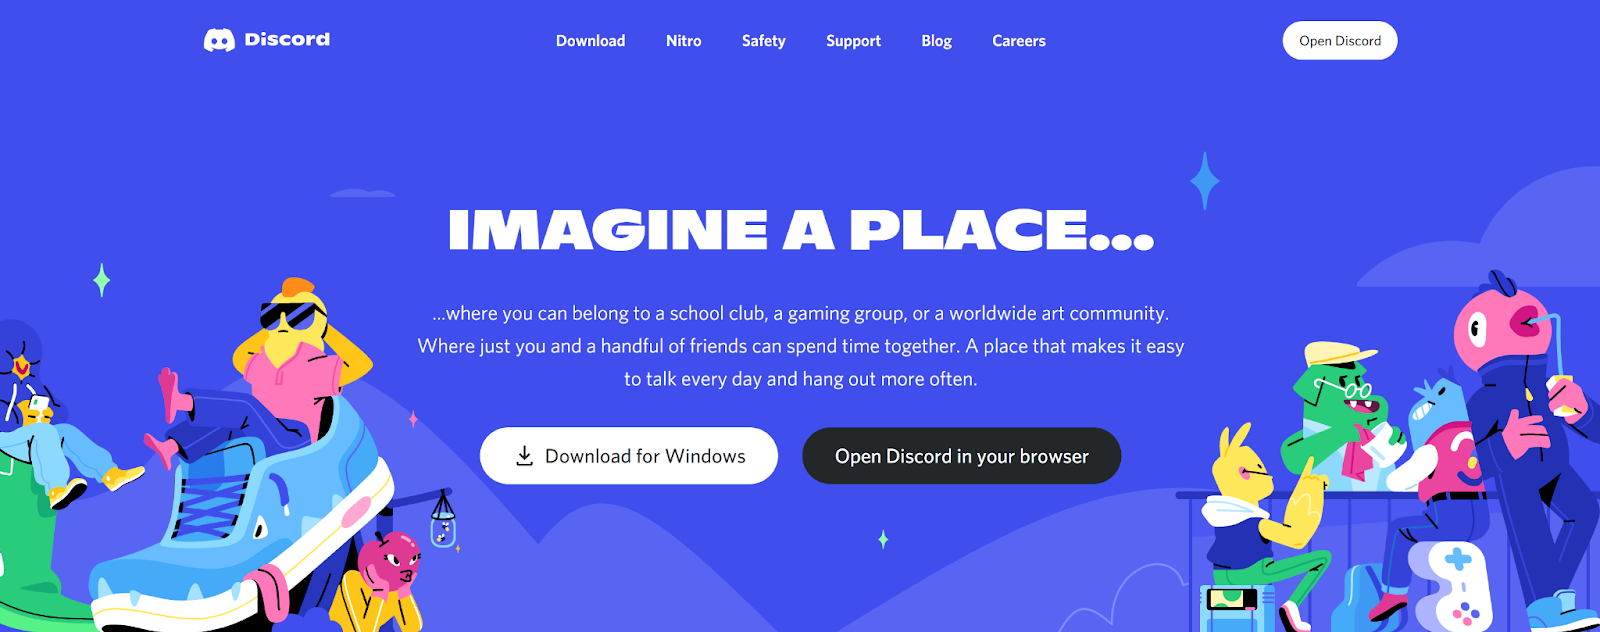 discord home page